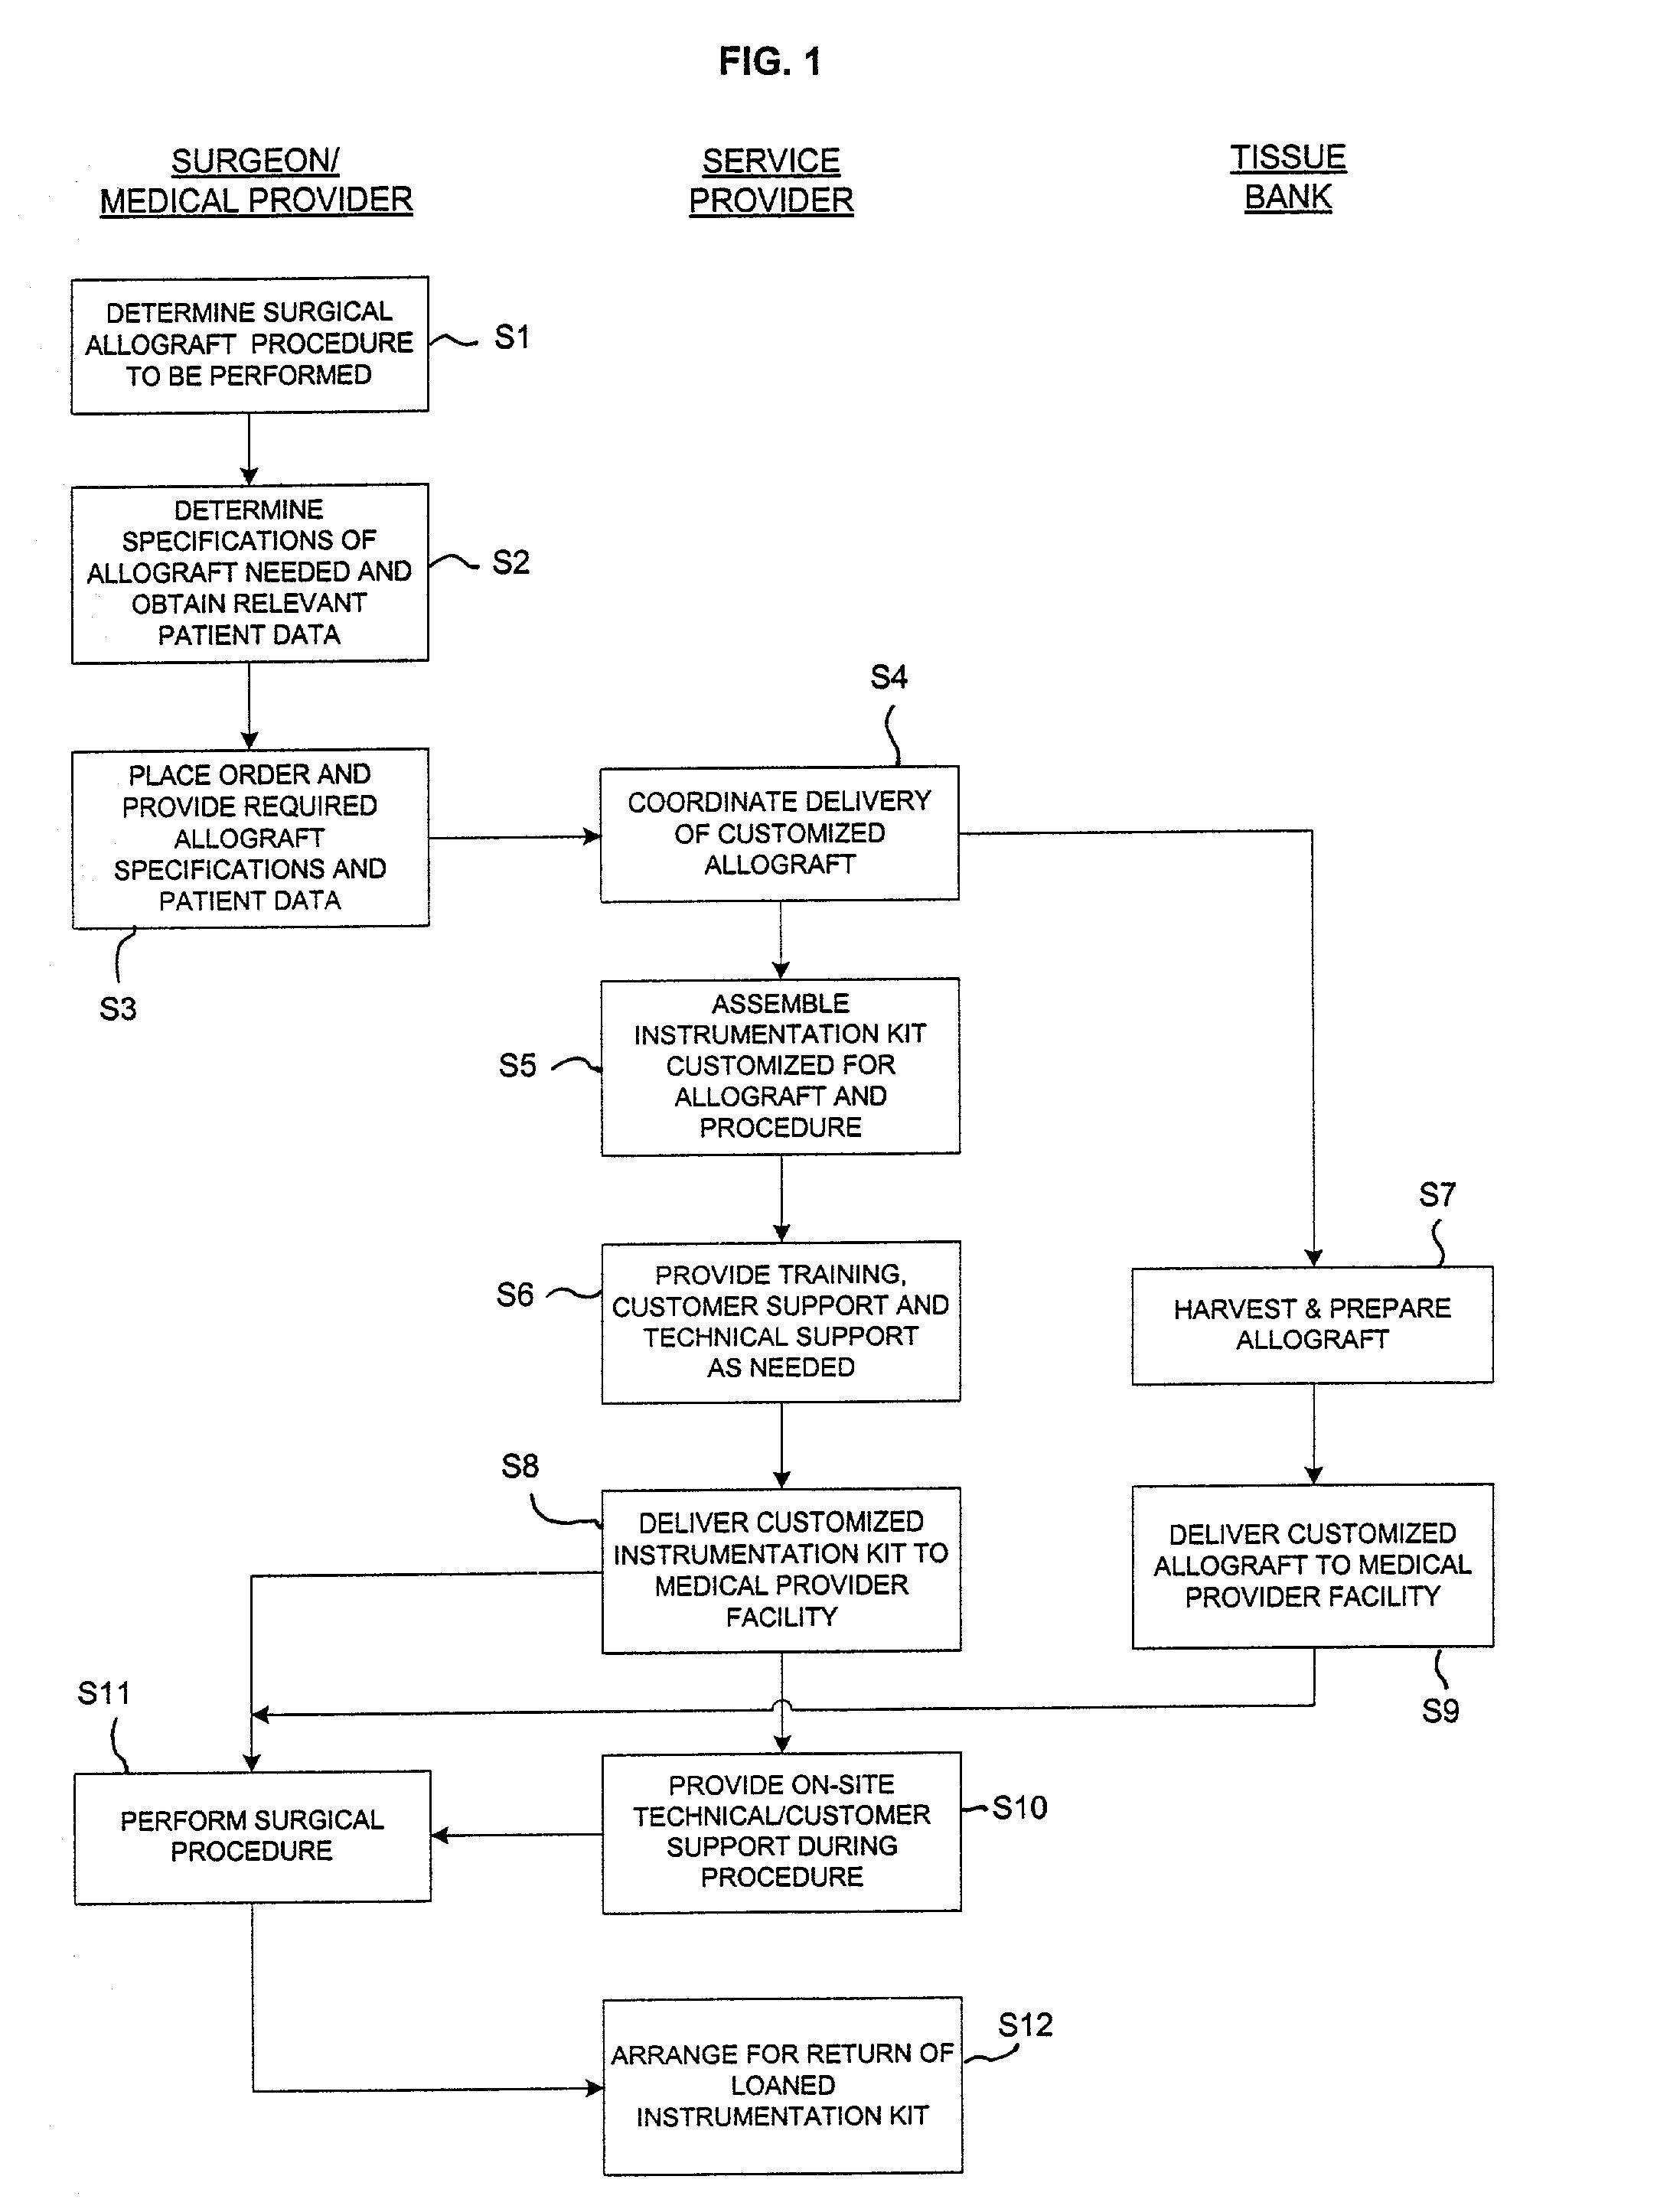 Method of selling procedure specific allografts and associated instrumentation